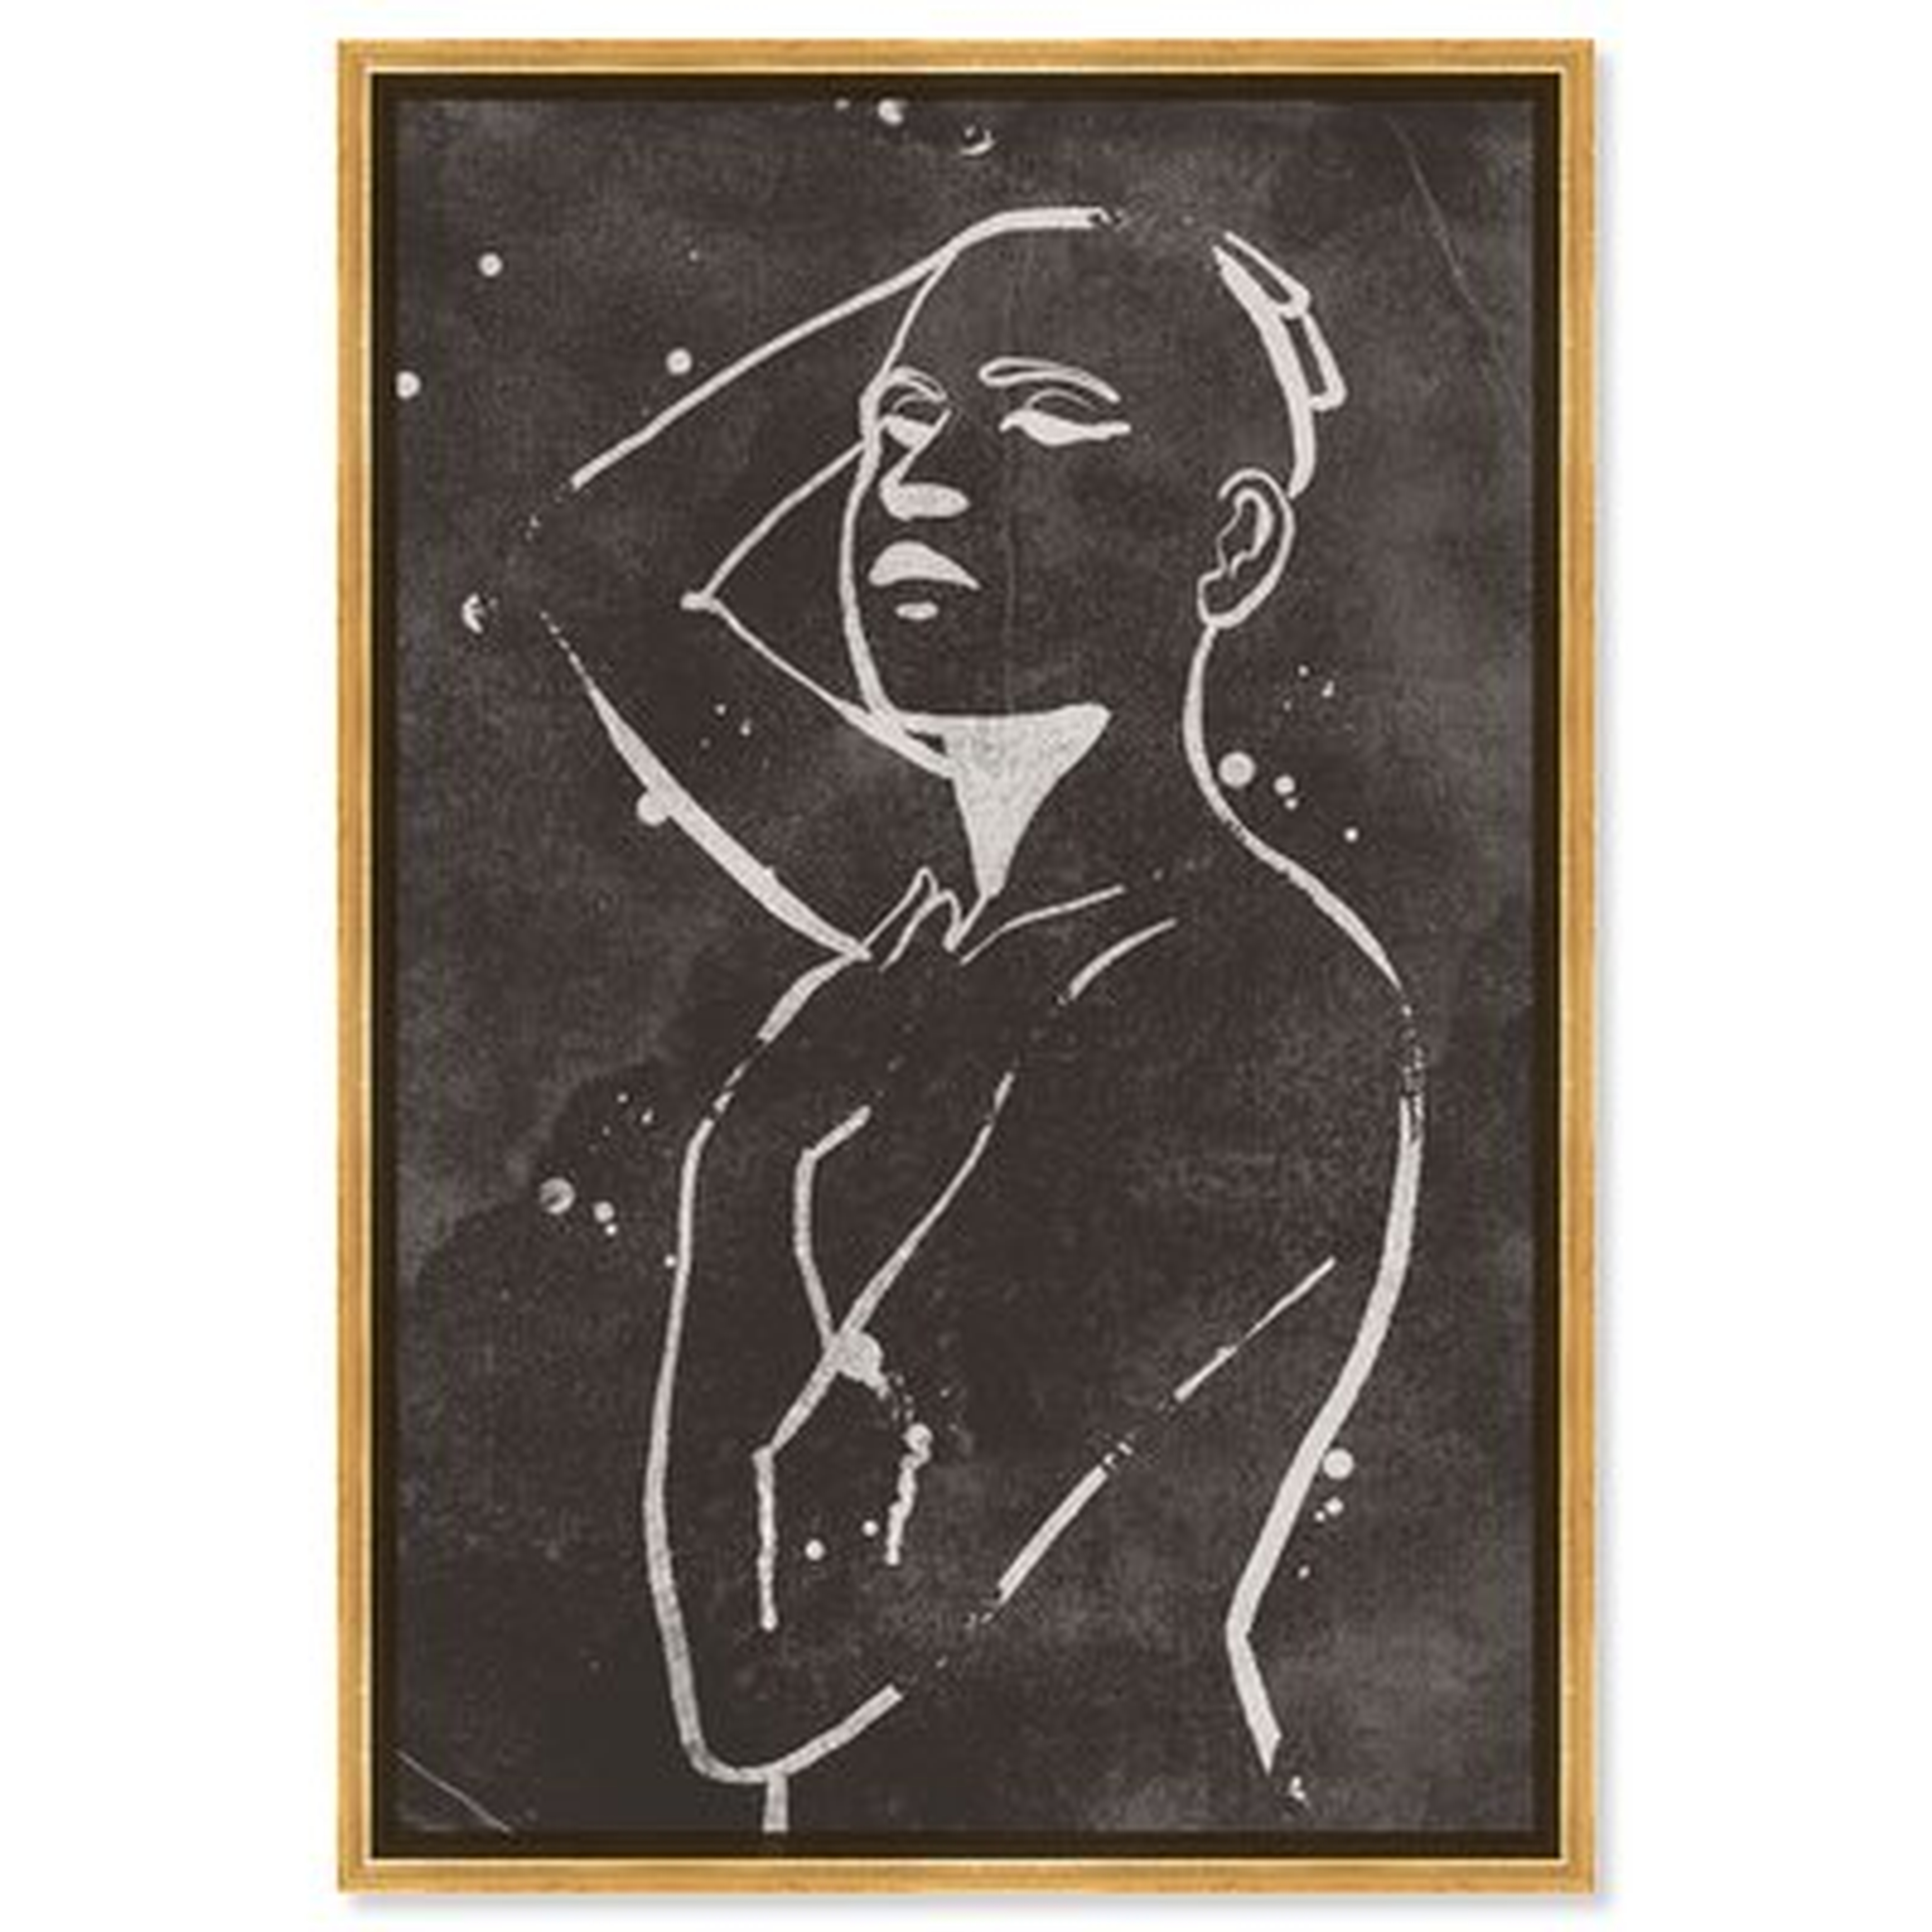 People and Portraits Negative Space Portraits - Painting Print on Canvas - Wayfair